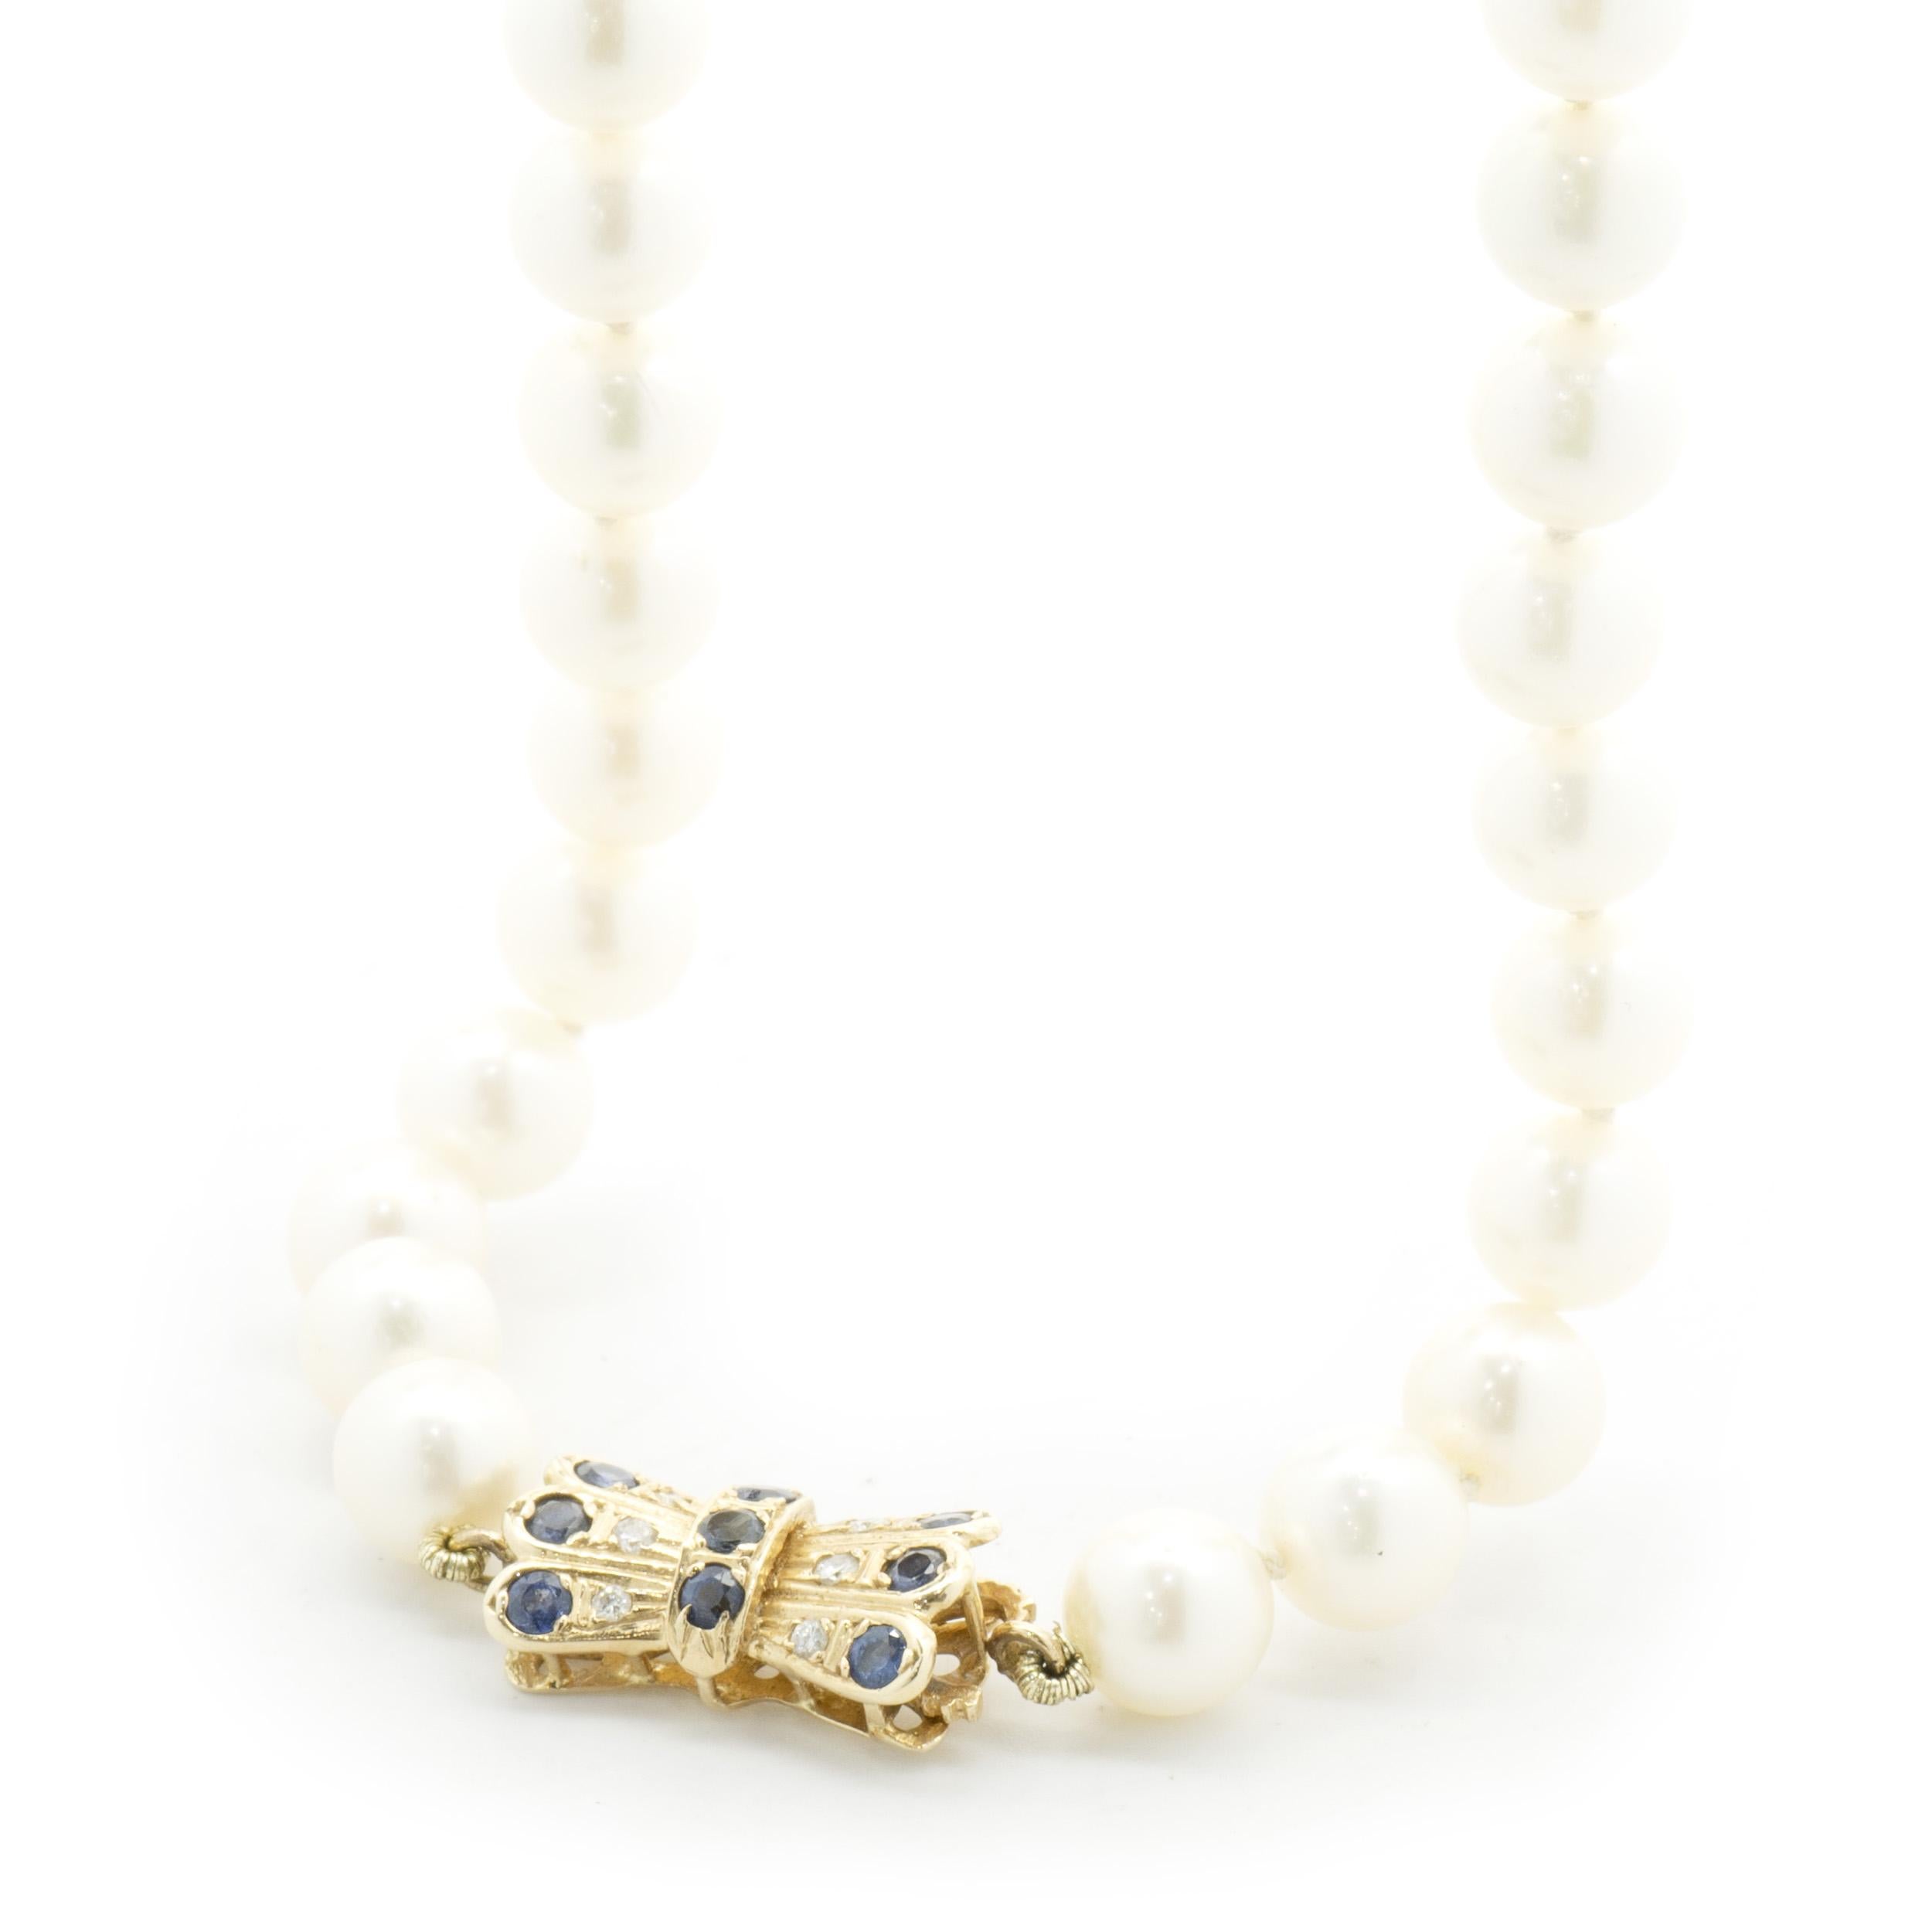 14 Karat Yellow Gold 6mm Cultured Pearl Necklace with Sapphire and Diamond Clasp In Excellent Condition For Sale In Scottsdale, AZ